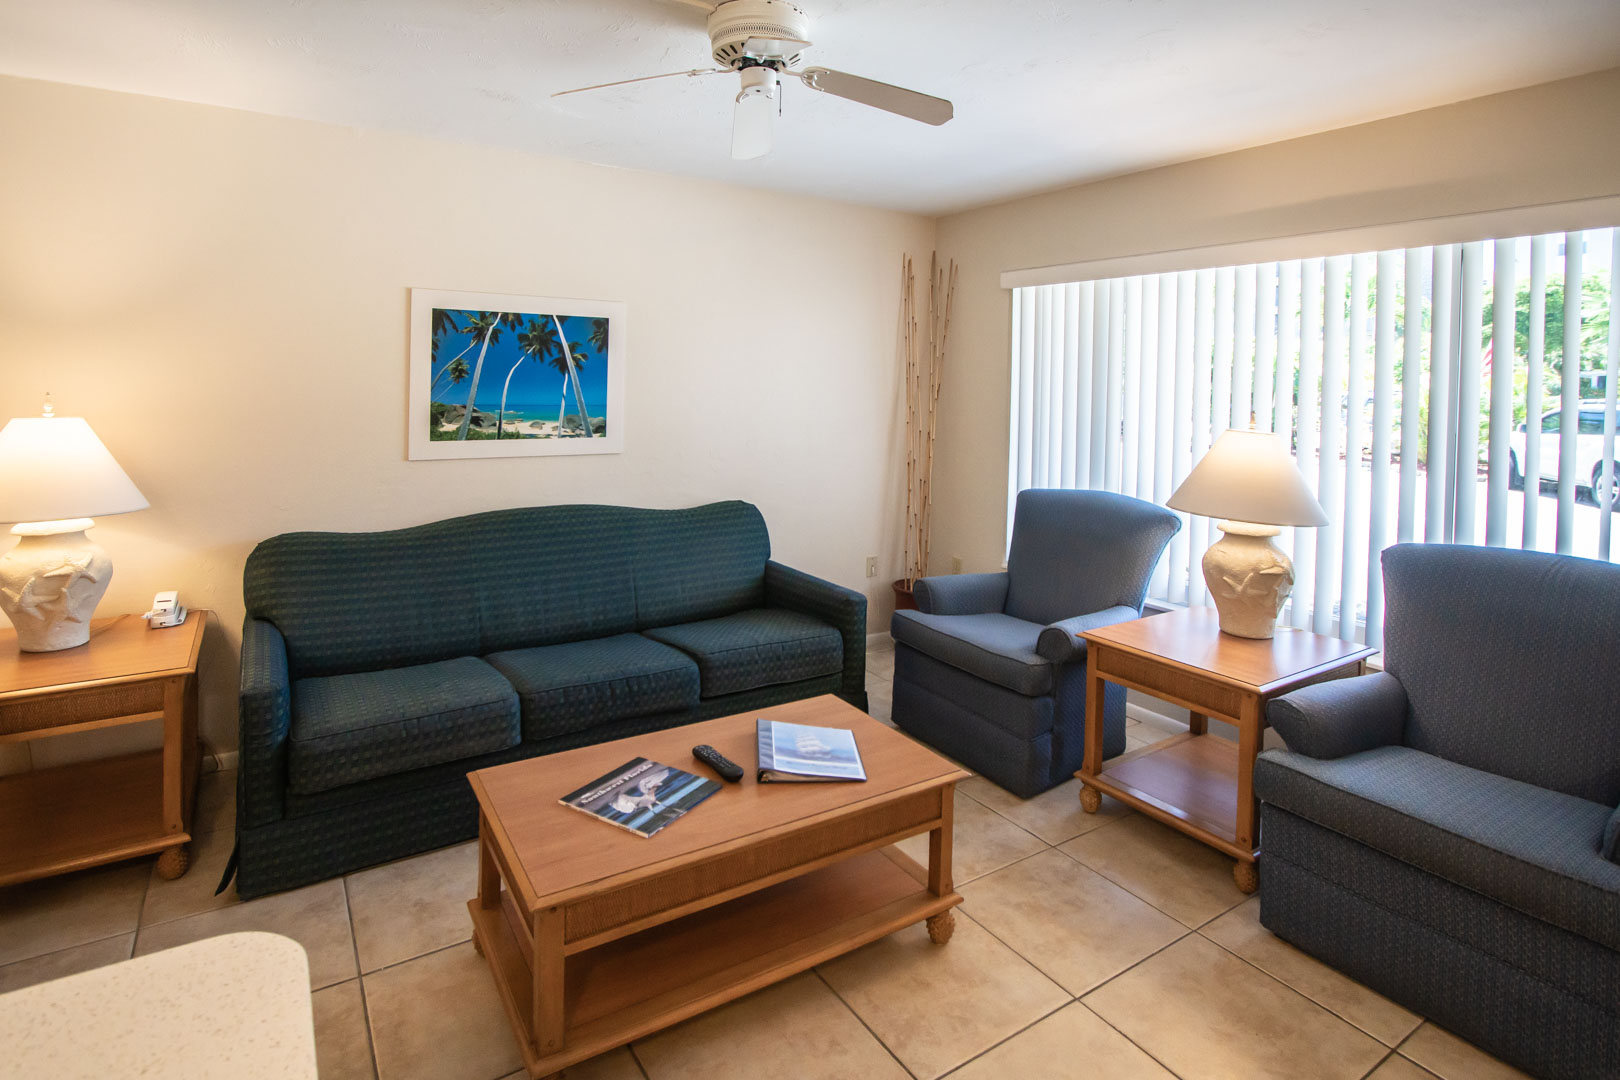 A quaint living room at VRI's Windward Passage Resort in Fort Myers Beach, Florida.